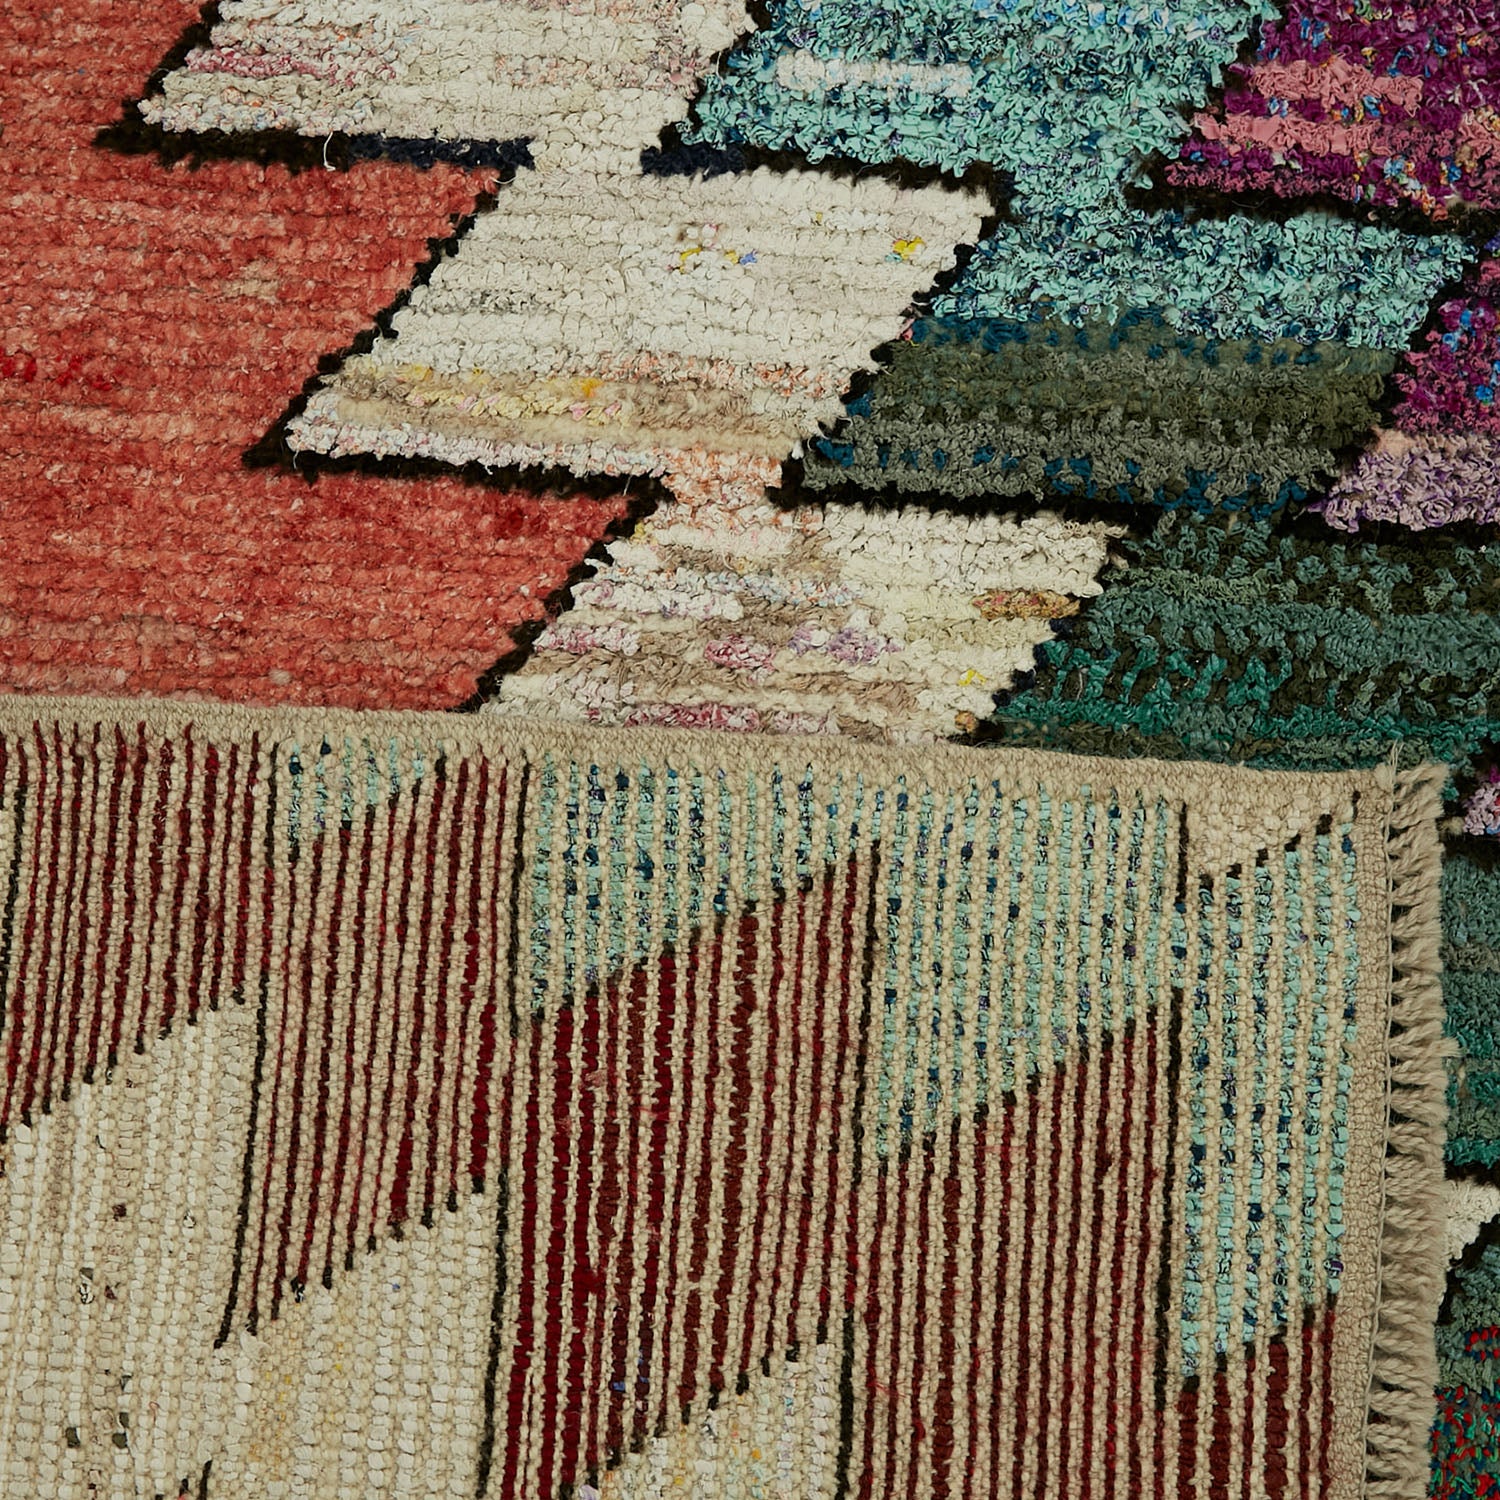 Close-up of a vibrant, textured textile showcasing intricate patterns.